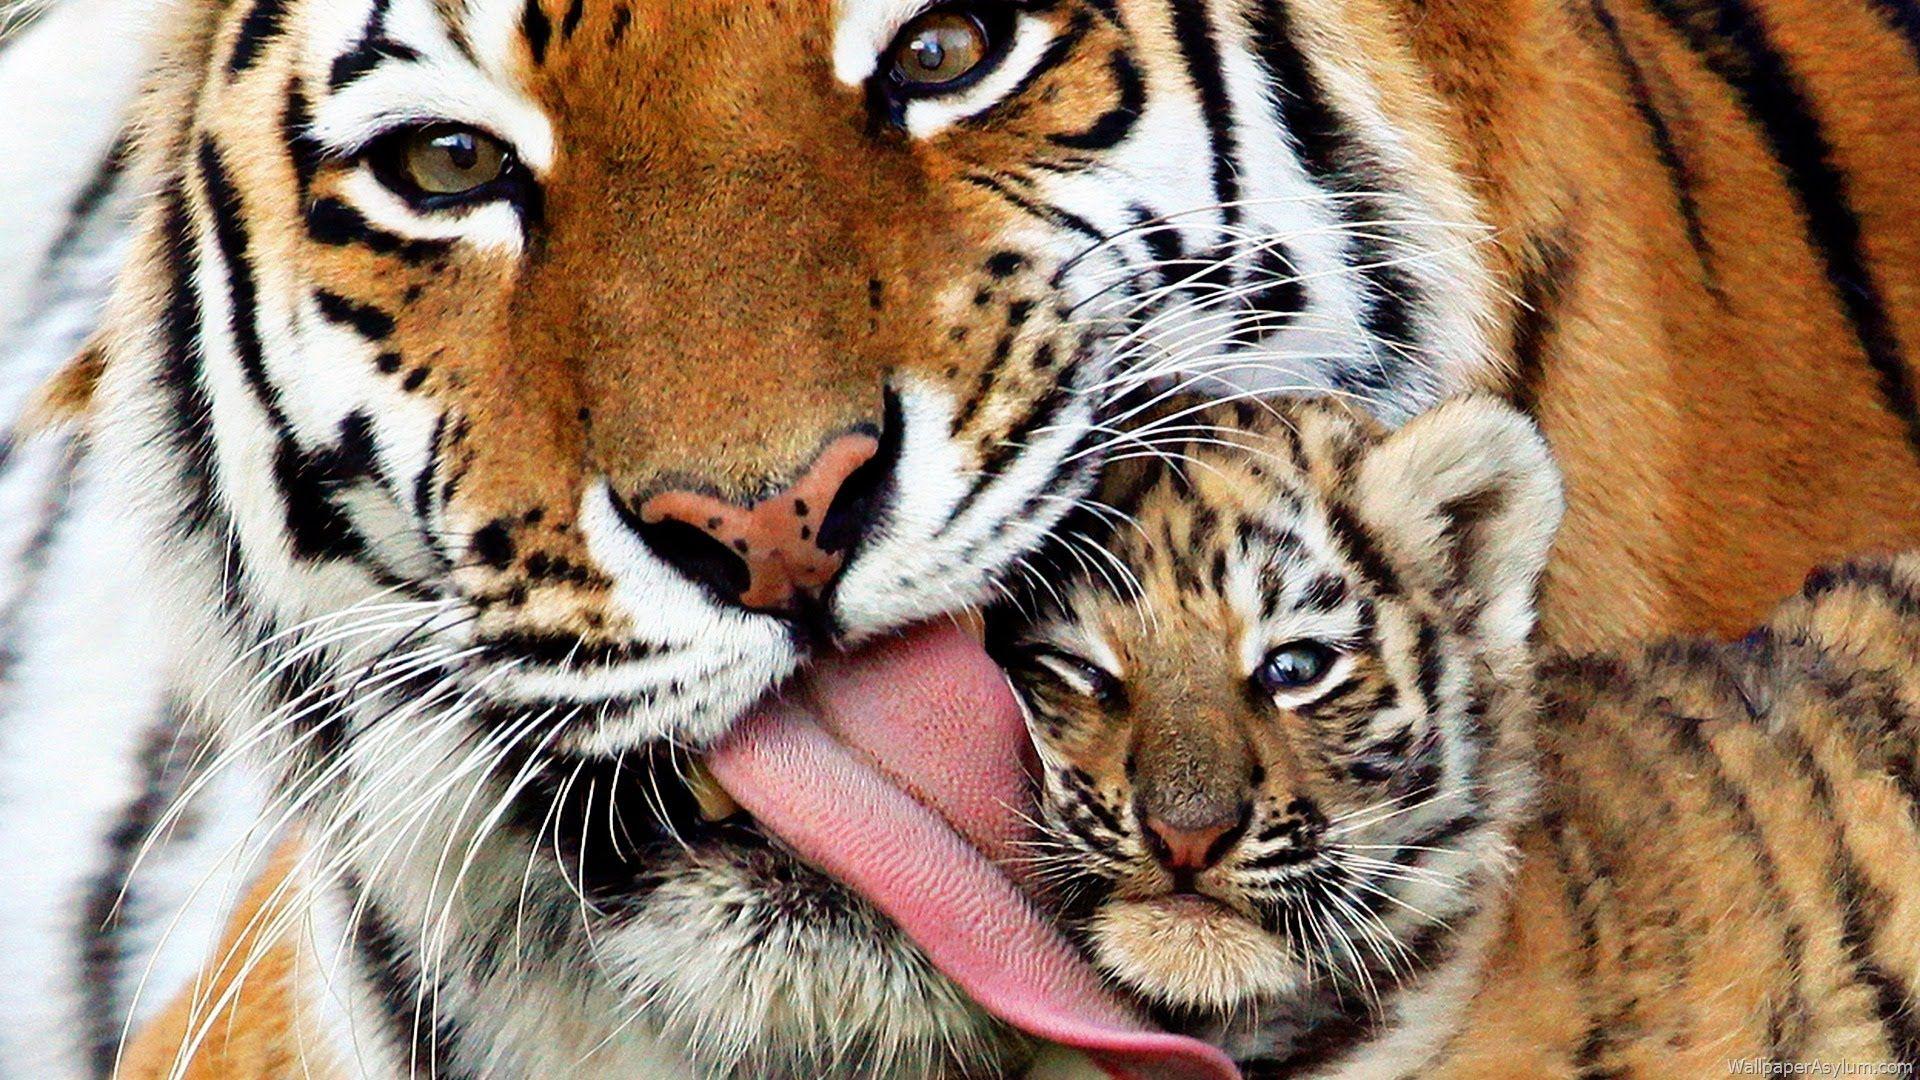 Tiger Animal Facts & Background HD Wallpaper Download